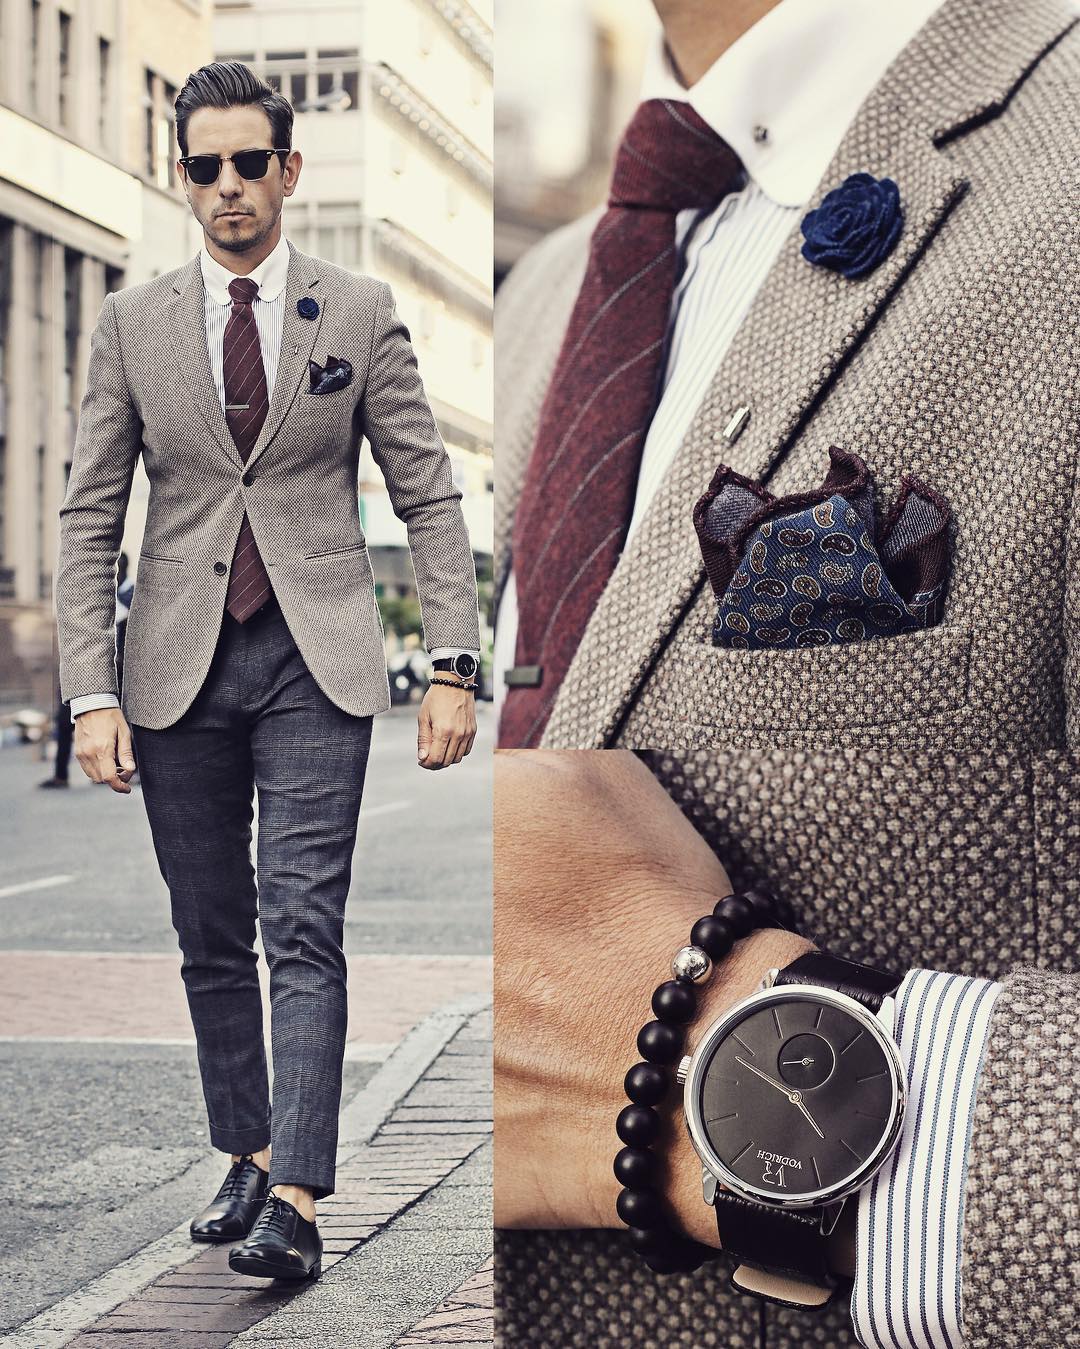 Suit Watch And Shoes Combinations For Men